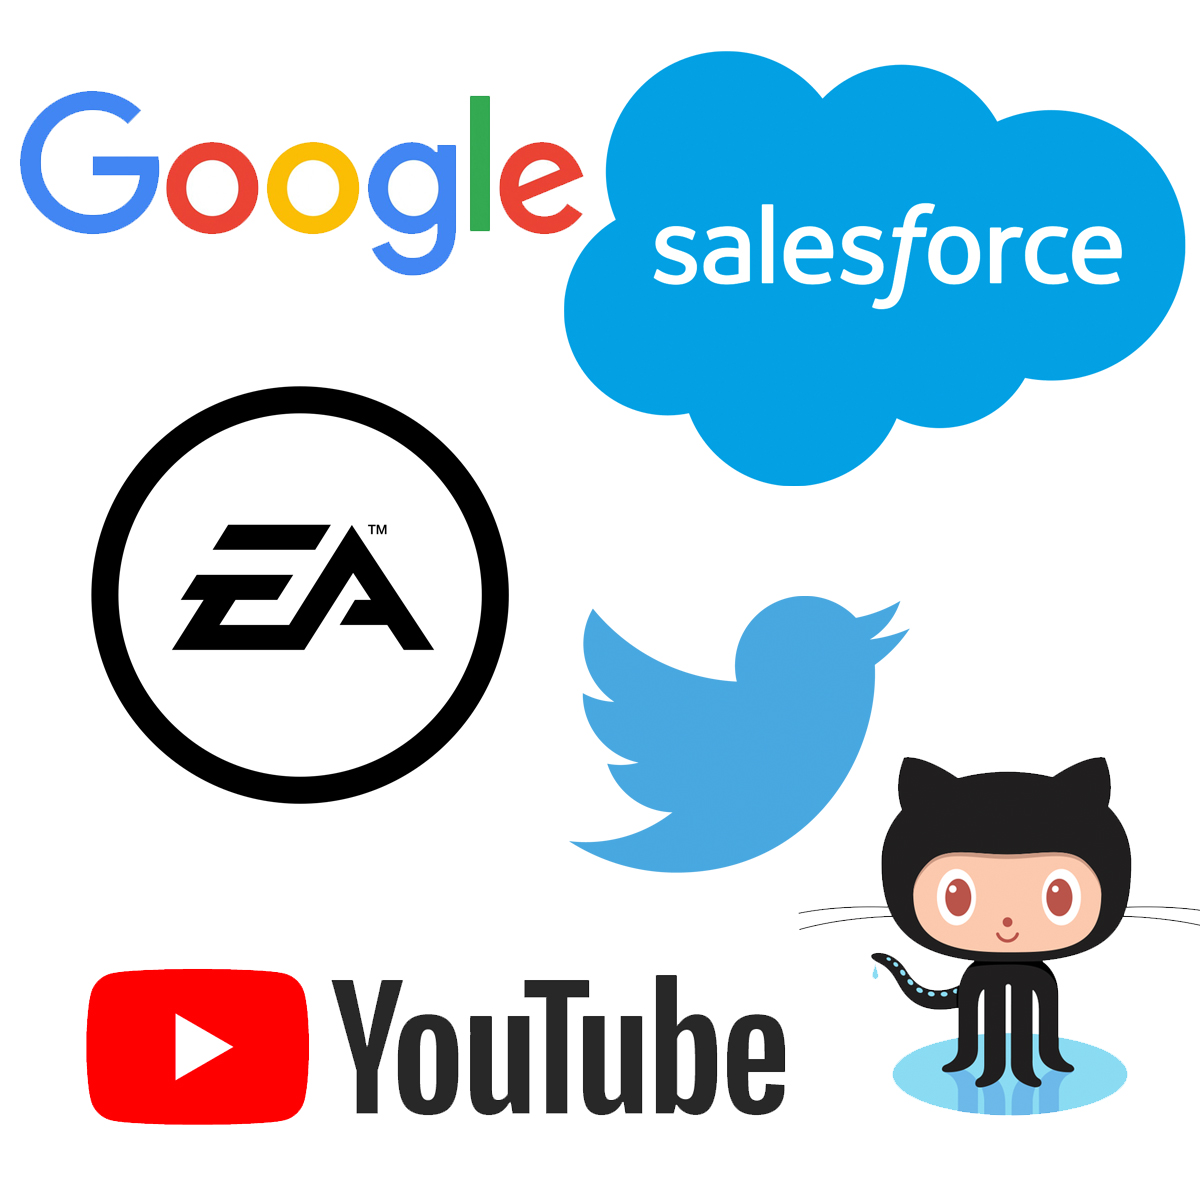 Company Logos that are using Web Components